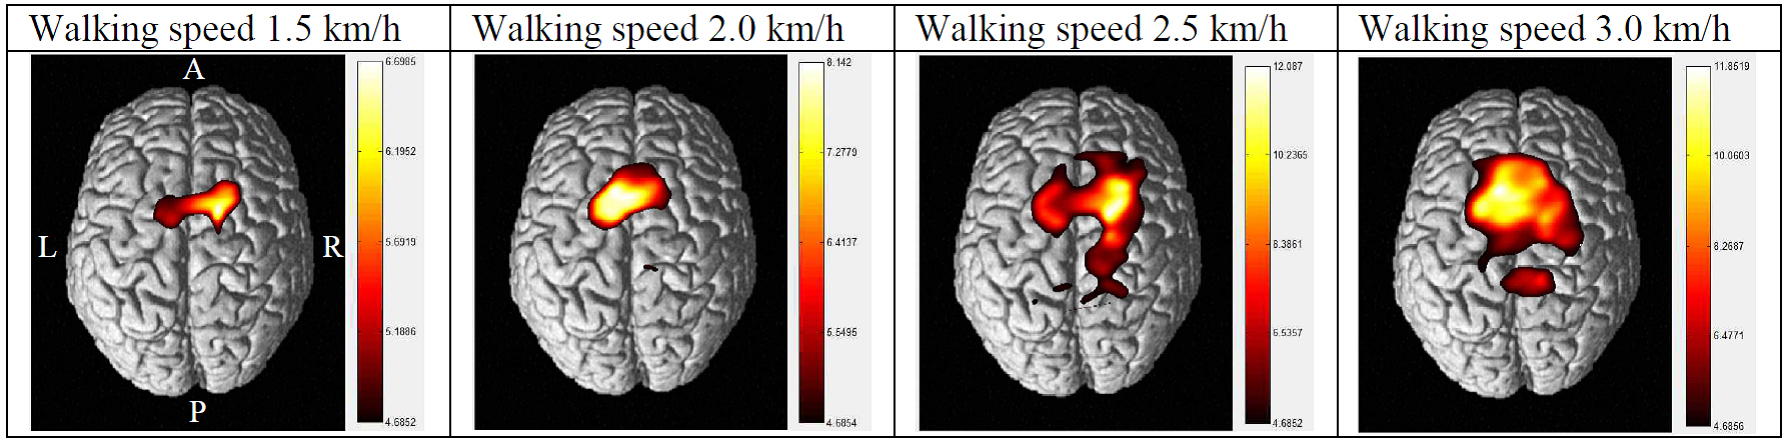 Patterns of cortical activation during different walking speeds.